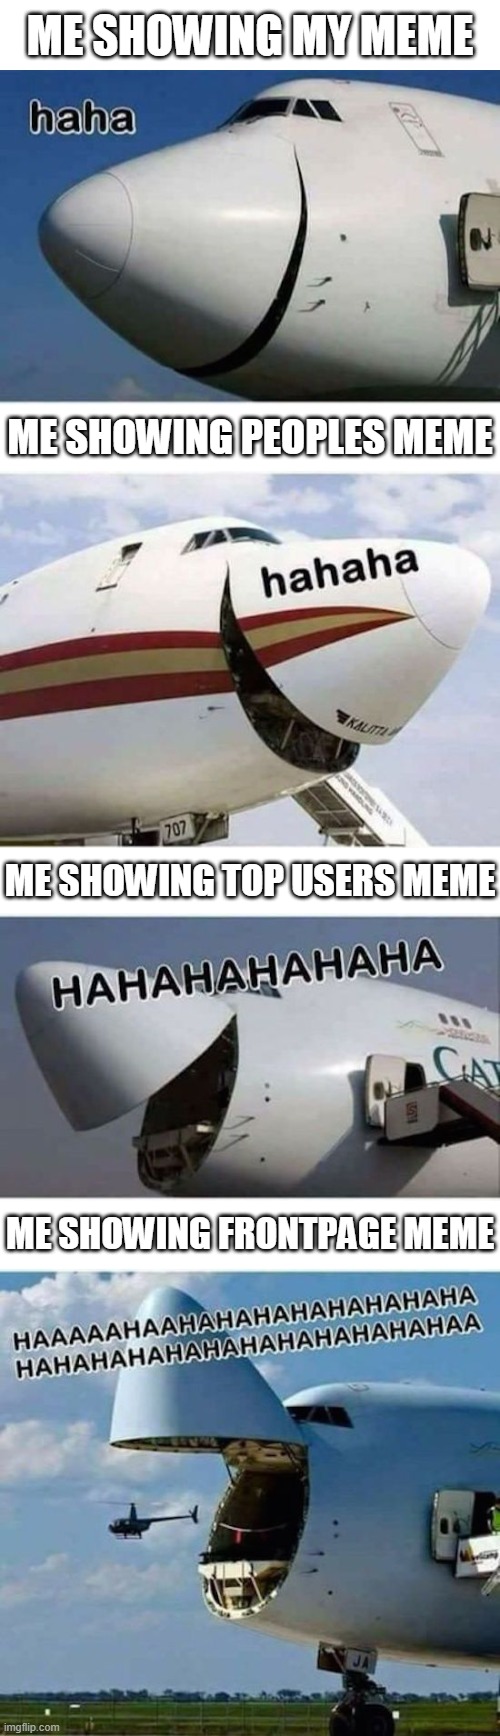 XDDD | ME SHOWING MY MEME; ME SHOWING PEOPLES MEME; ME SHOWING TOP USERS MEME; ME SHOWING FRONTPAGE MEME | image tagged in blank white template,airplane,laughing | made w/ Imgflip meme maker